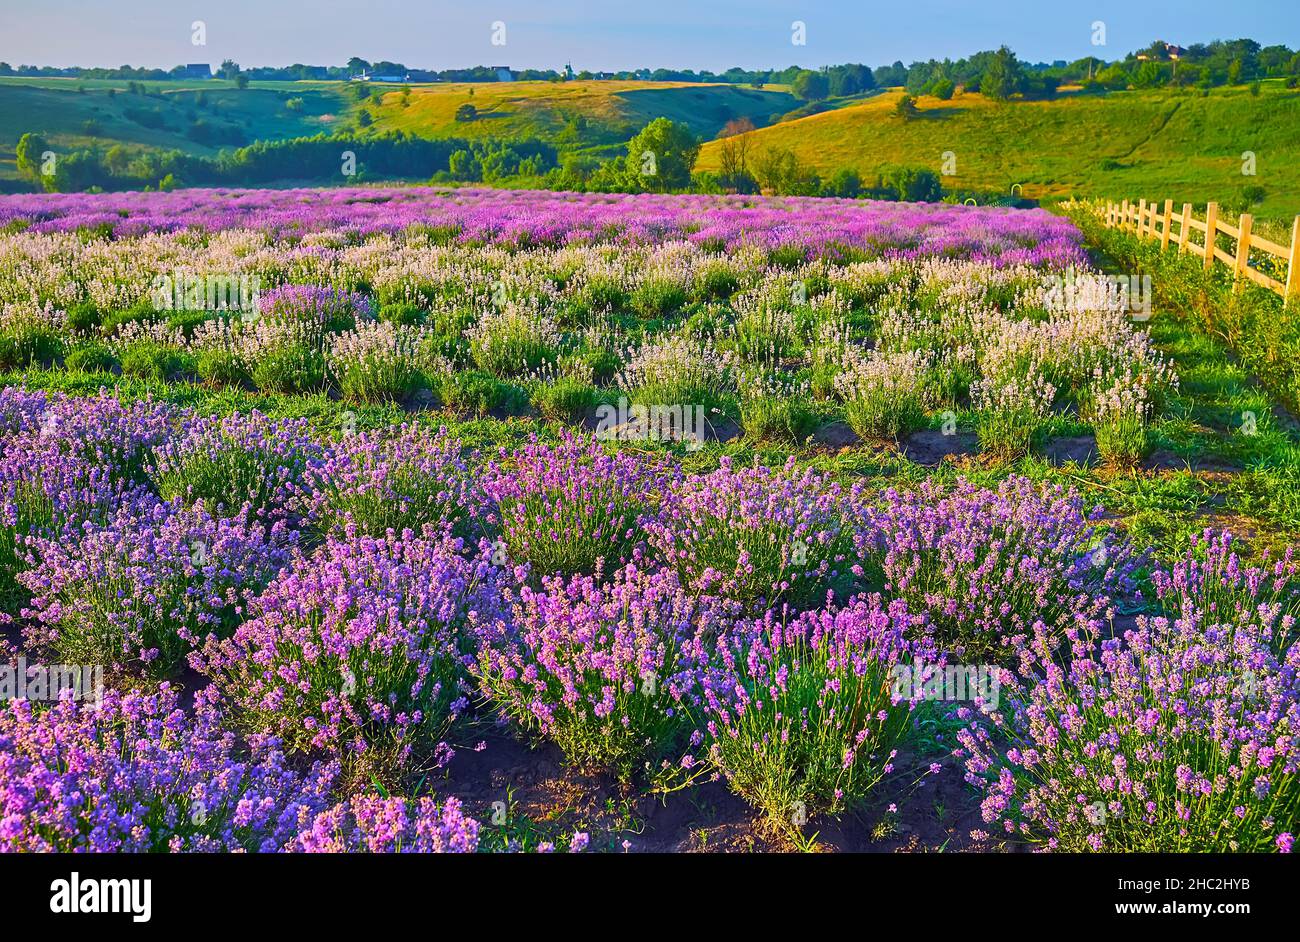 The carpet of blooming purple and white lavender shrubs in the field Stock Photo